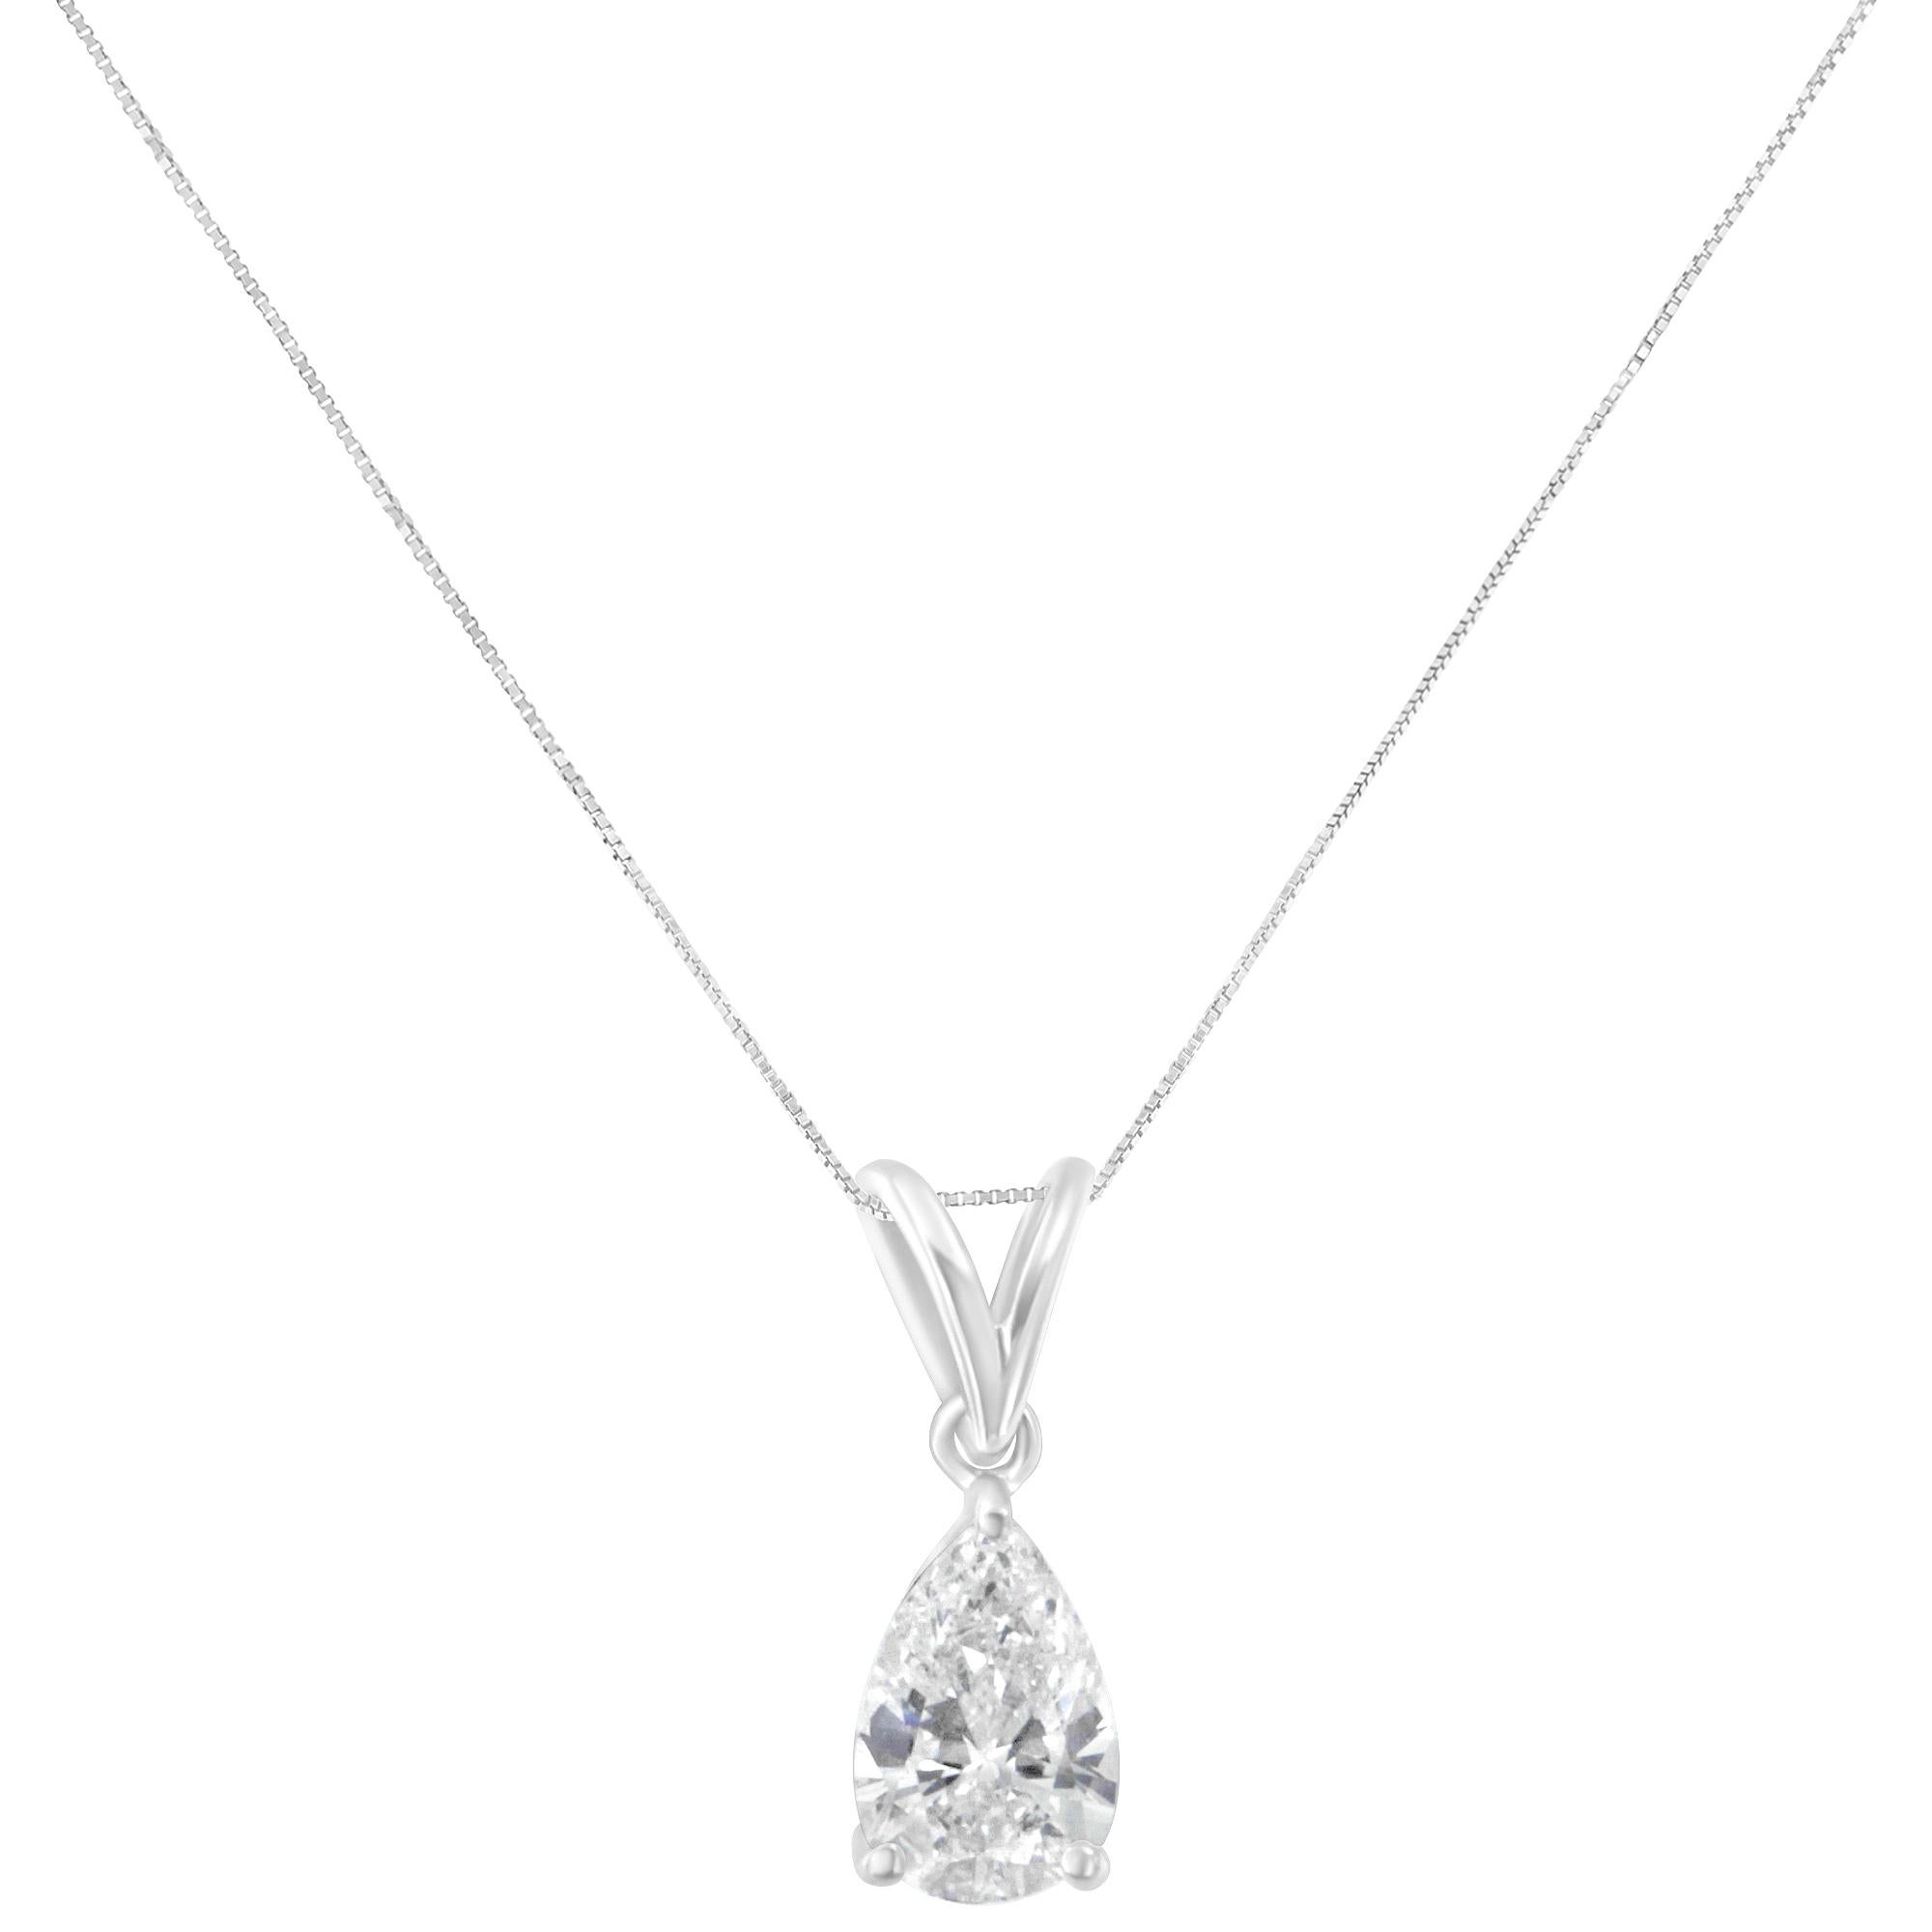 This timeless design features a pear cut diamond hanging from a delicate chain. A classic design to last a lifetime. It is crafted in 10 karat white gold and has a total diamond weight of 1/2 carats. This beautiful necklace includes 18” rolo chain